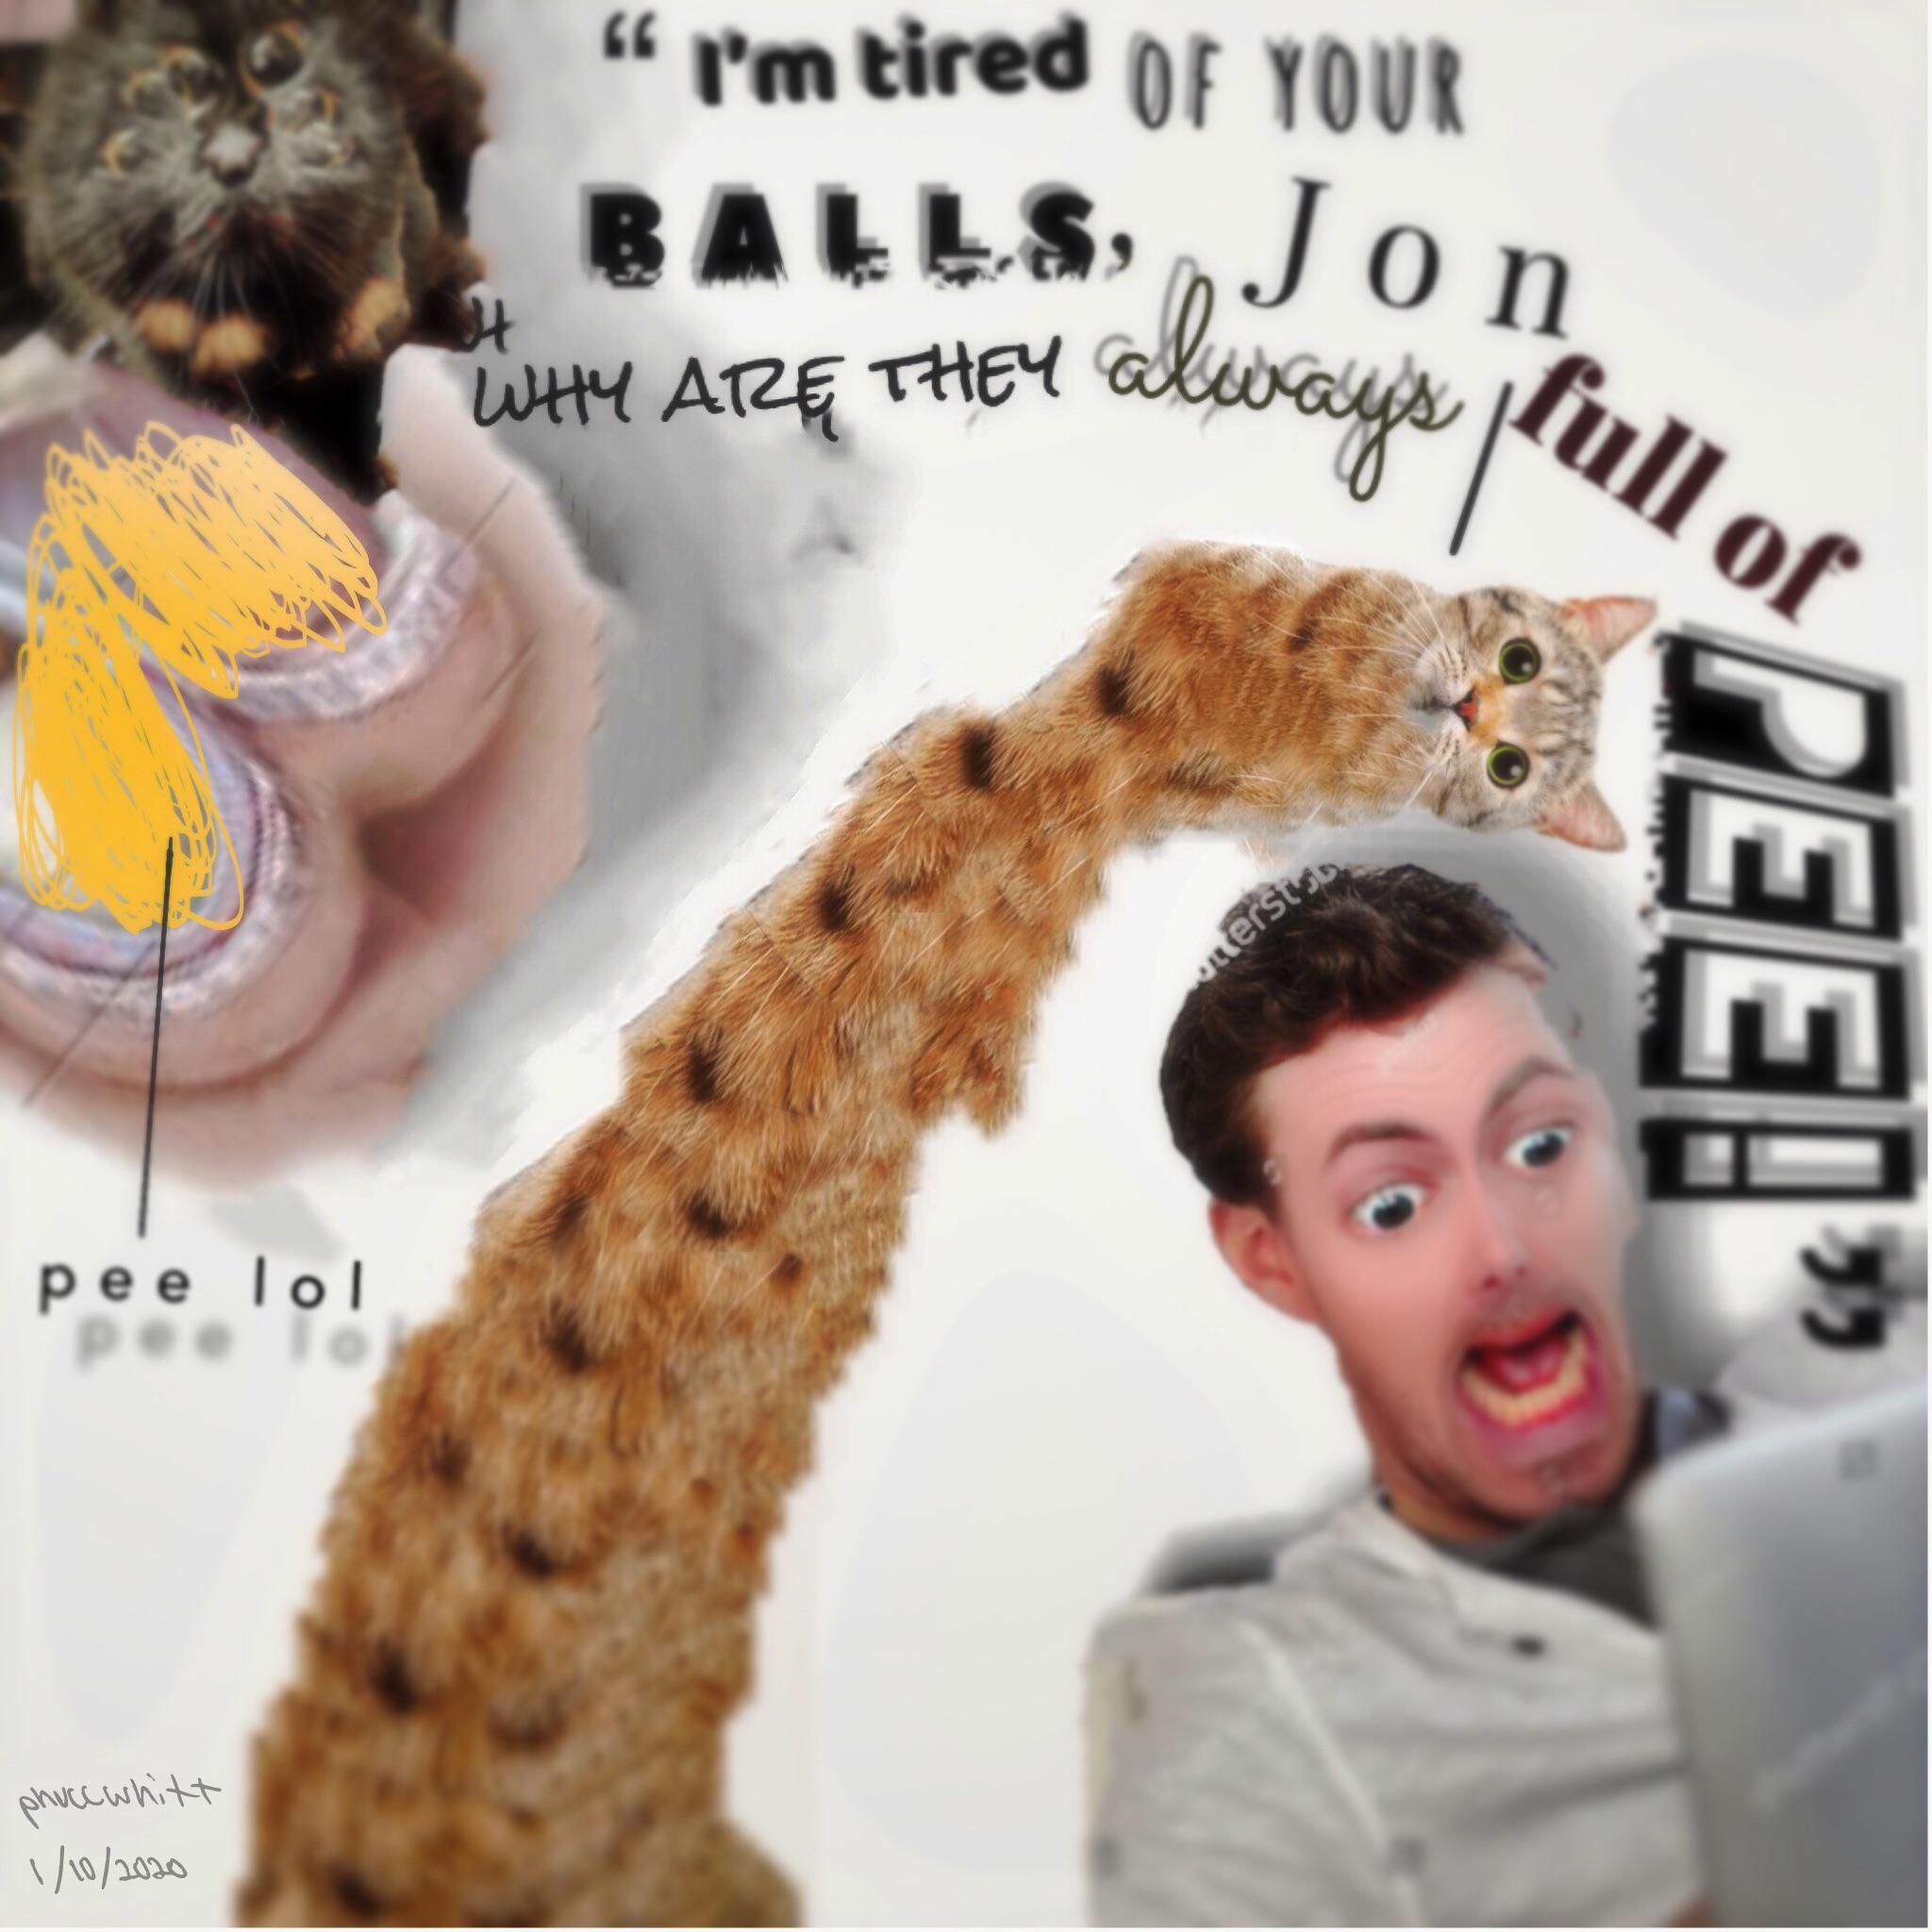 cursed memes - fur - I'm tired Of Your It Why Are They Balls, Jon always full of Pee! uuerstra pee lol phuce whitt 1102020